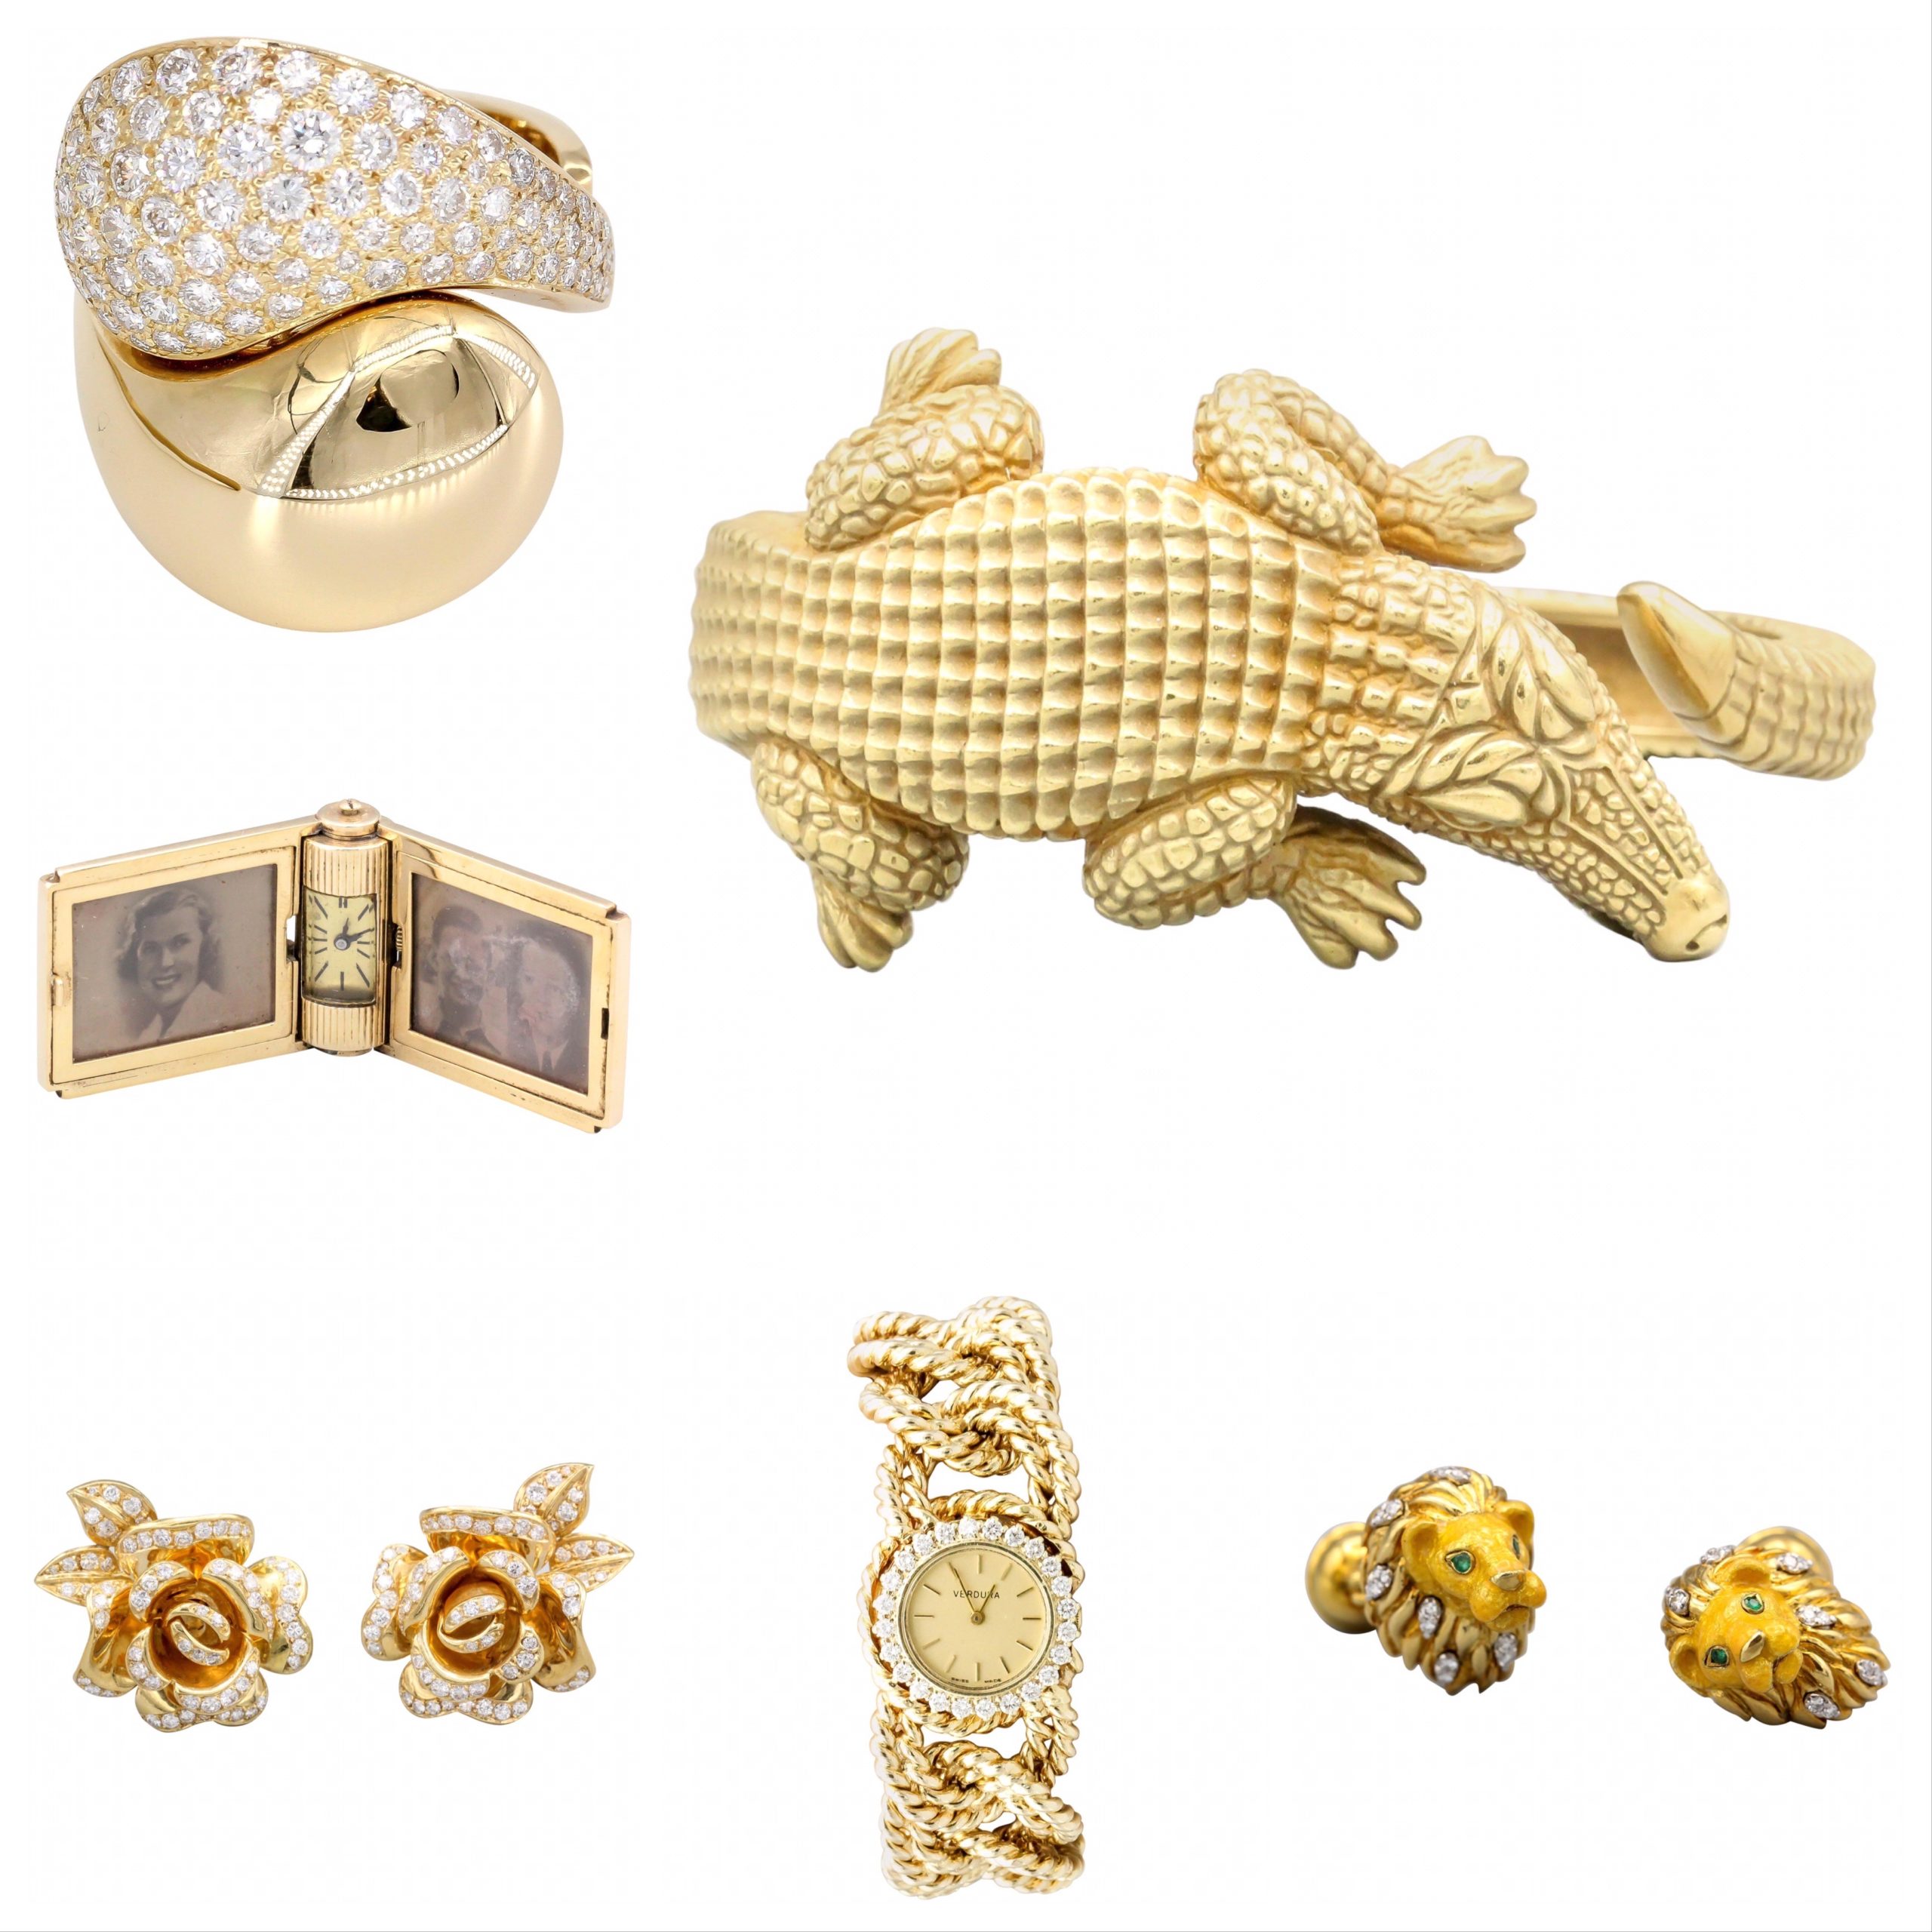 Various gold pieces of jewelry: Including a alligator cuff bracelet, lion cufflinks, gold link watch bracelet, flower earrings, photo frame clock, Yin Yang Ring